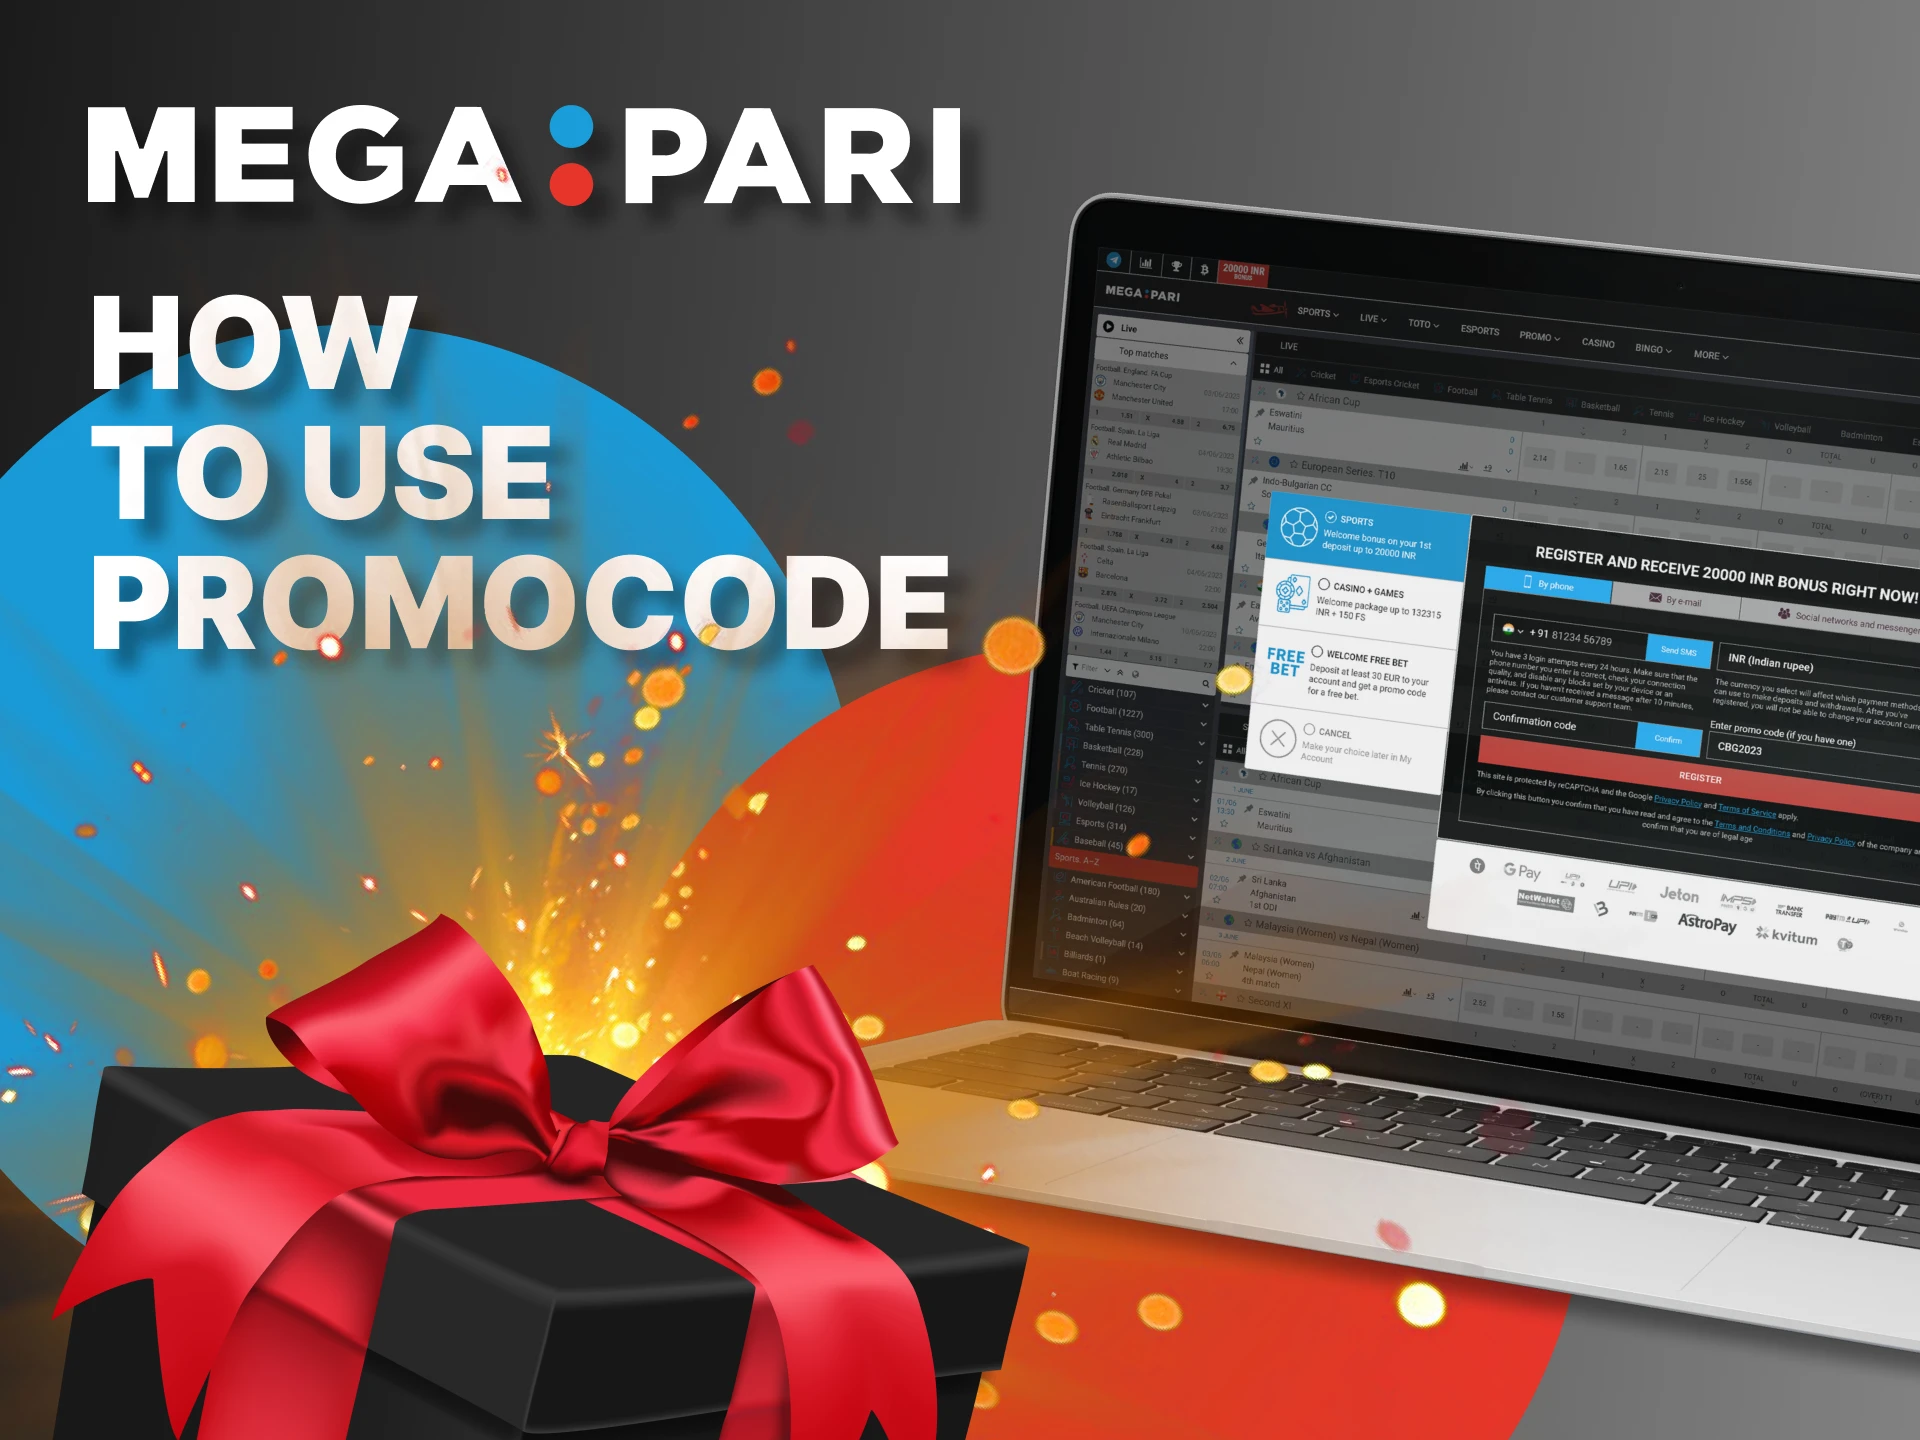 Use these instructions to get the benefits of Megapari promo code.